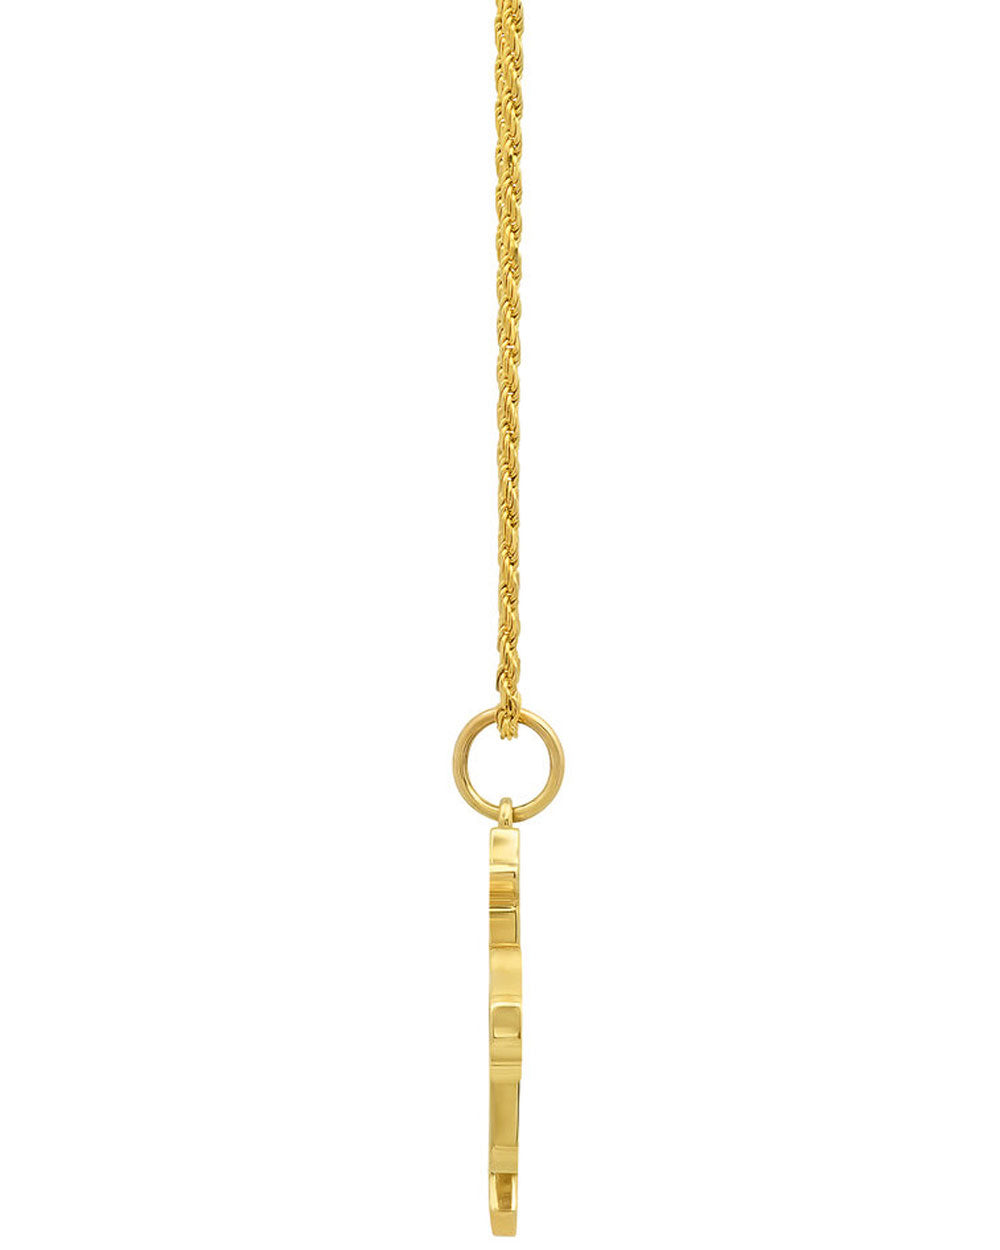 14k Yellow Gold Cowgirl Necklace